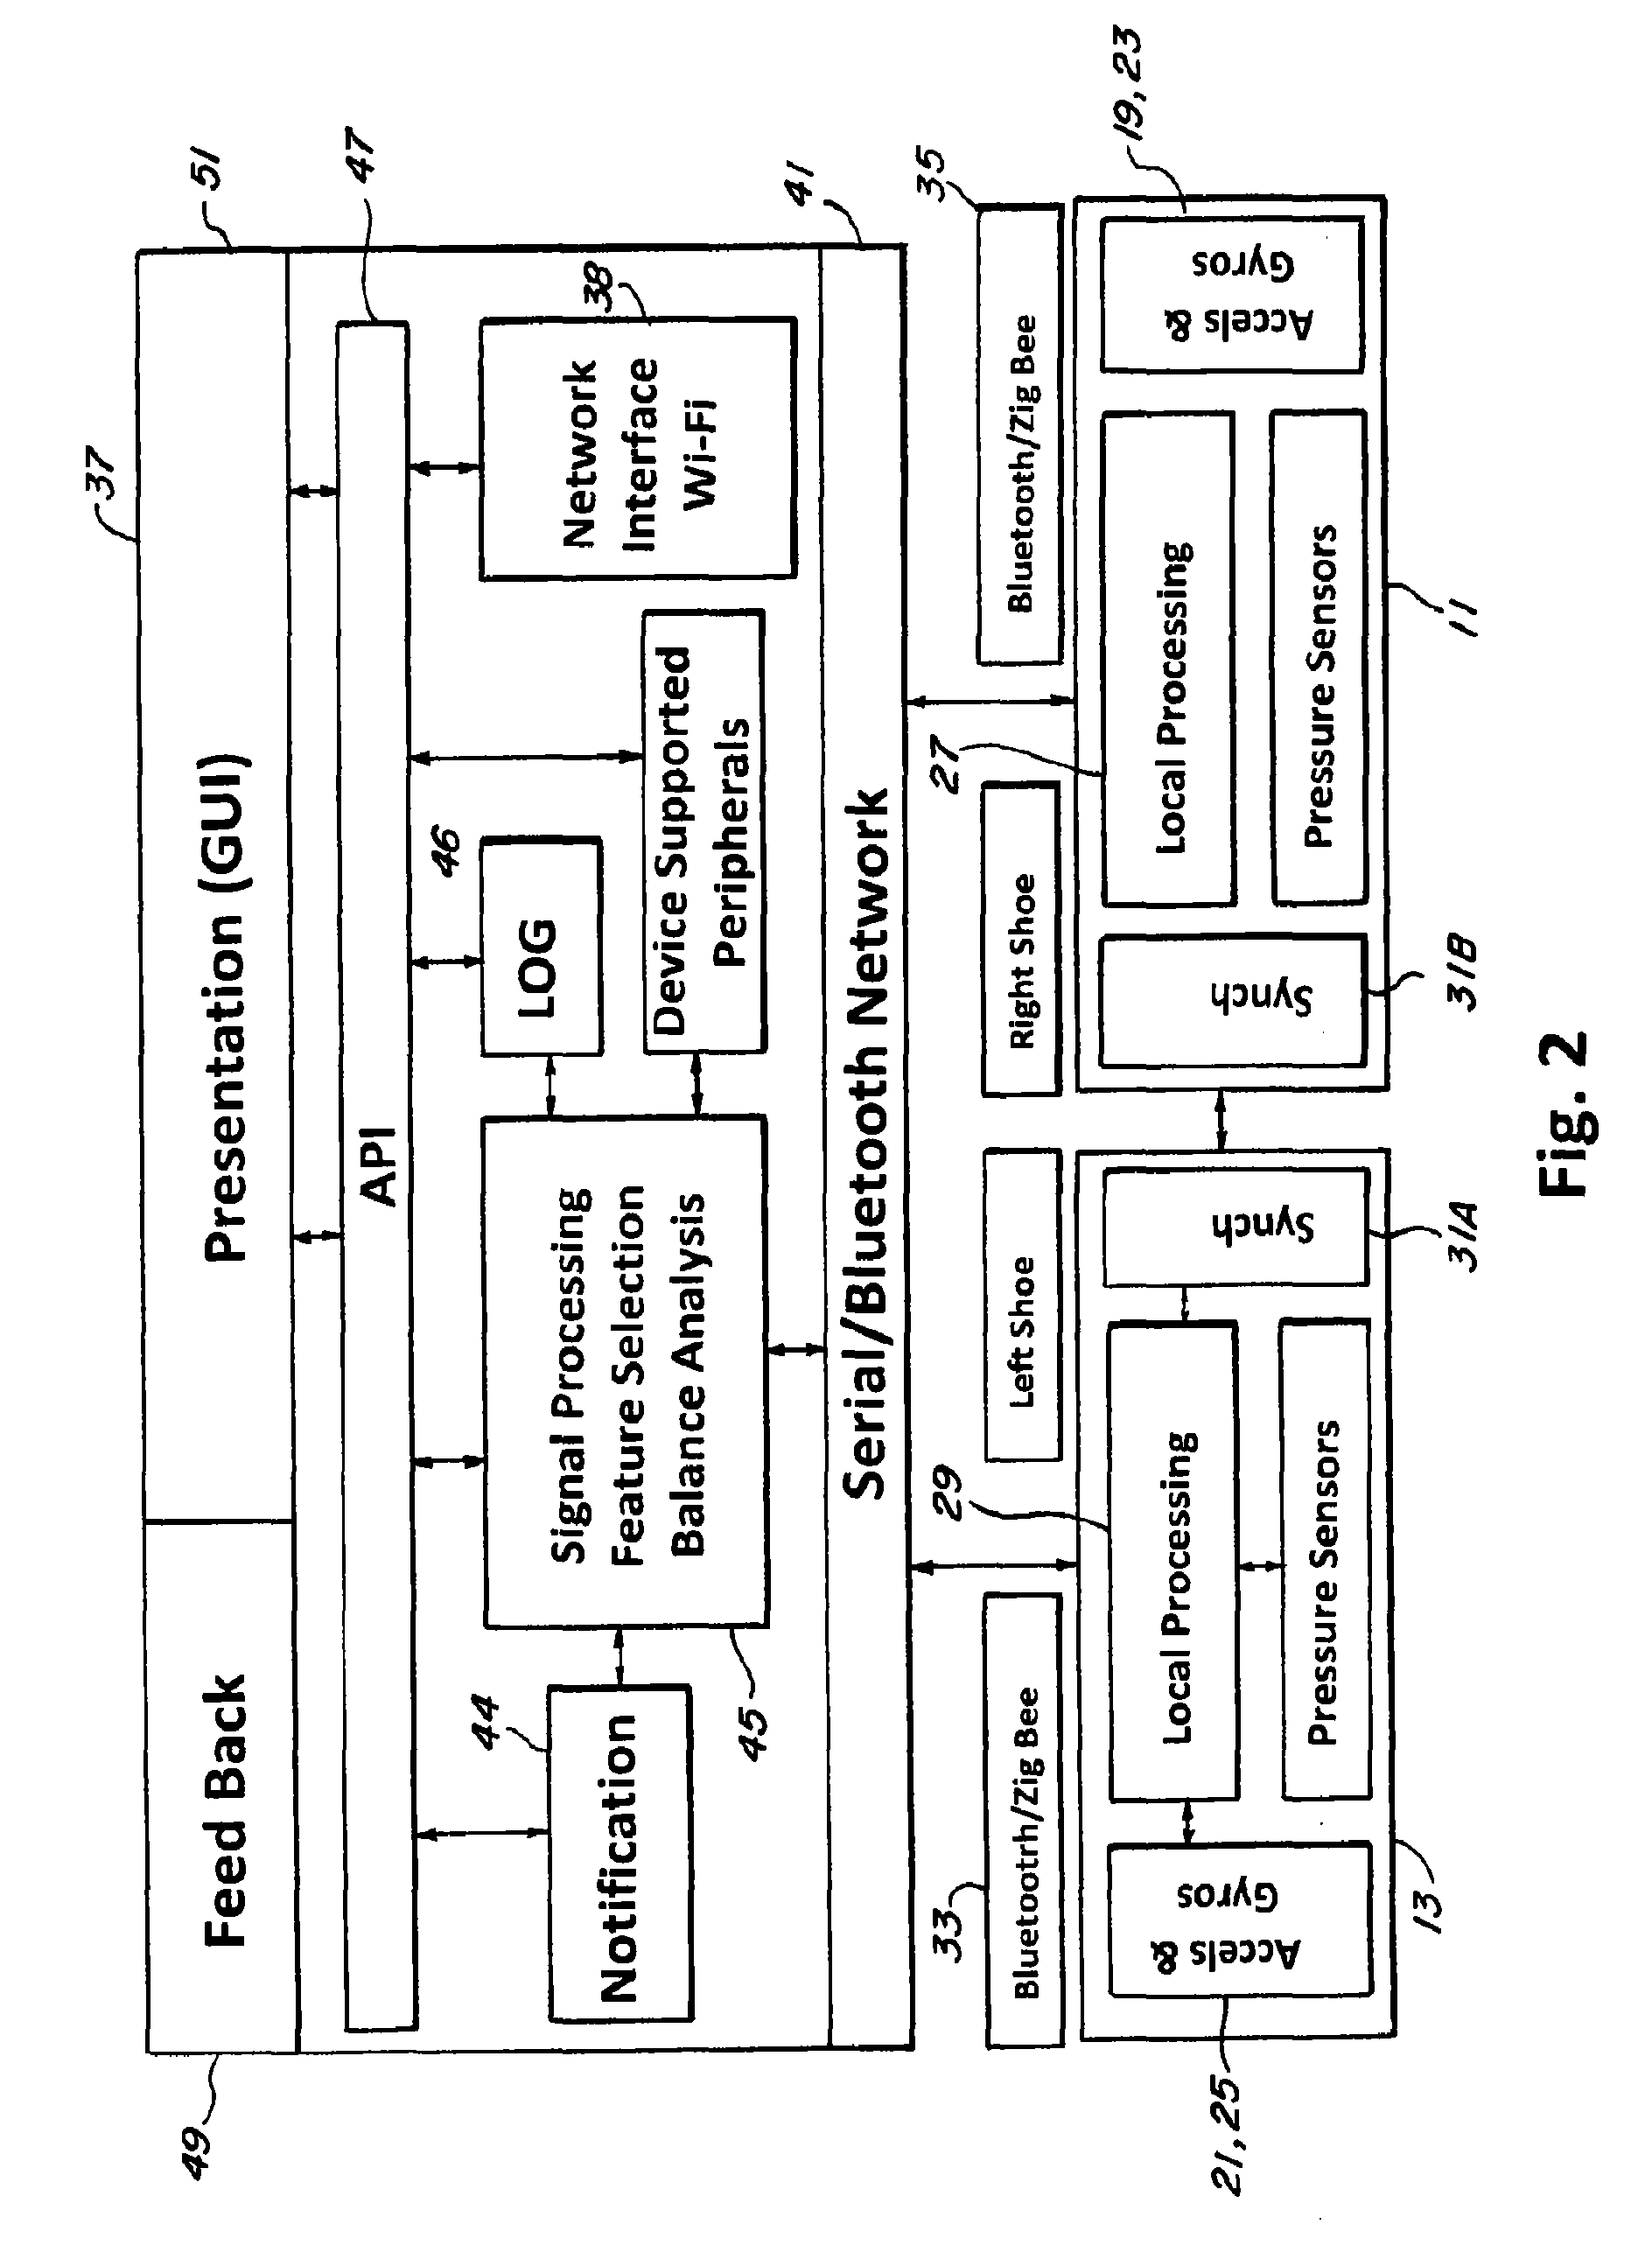 Method of assessing human fall risk using mobile systems